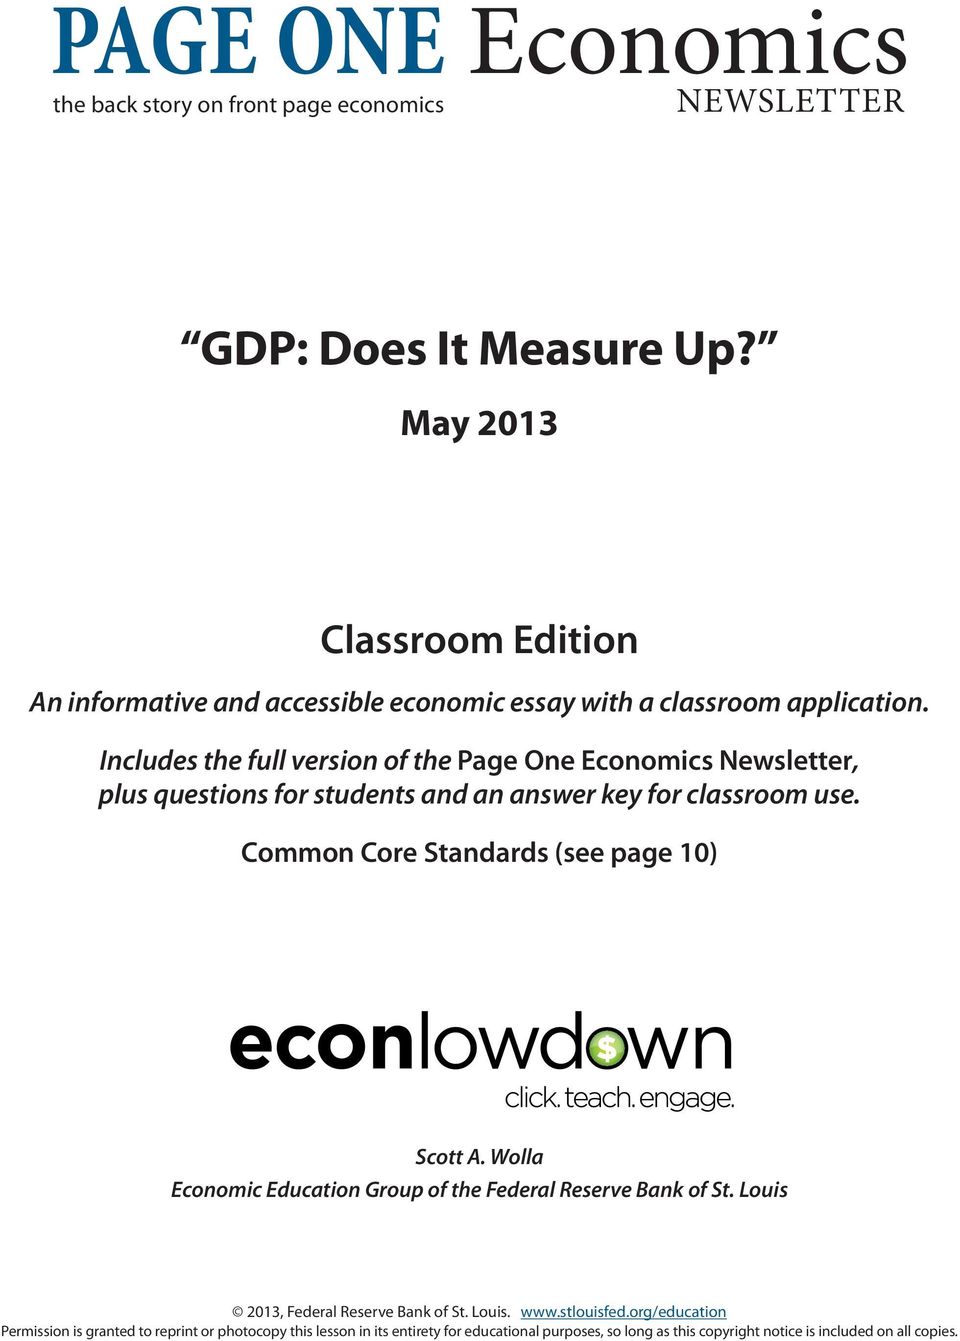 Includes the full version of the Page One Economics Newsletter, plus questions for students and an answer key for classroom use.